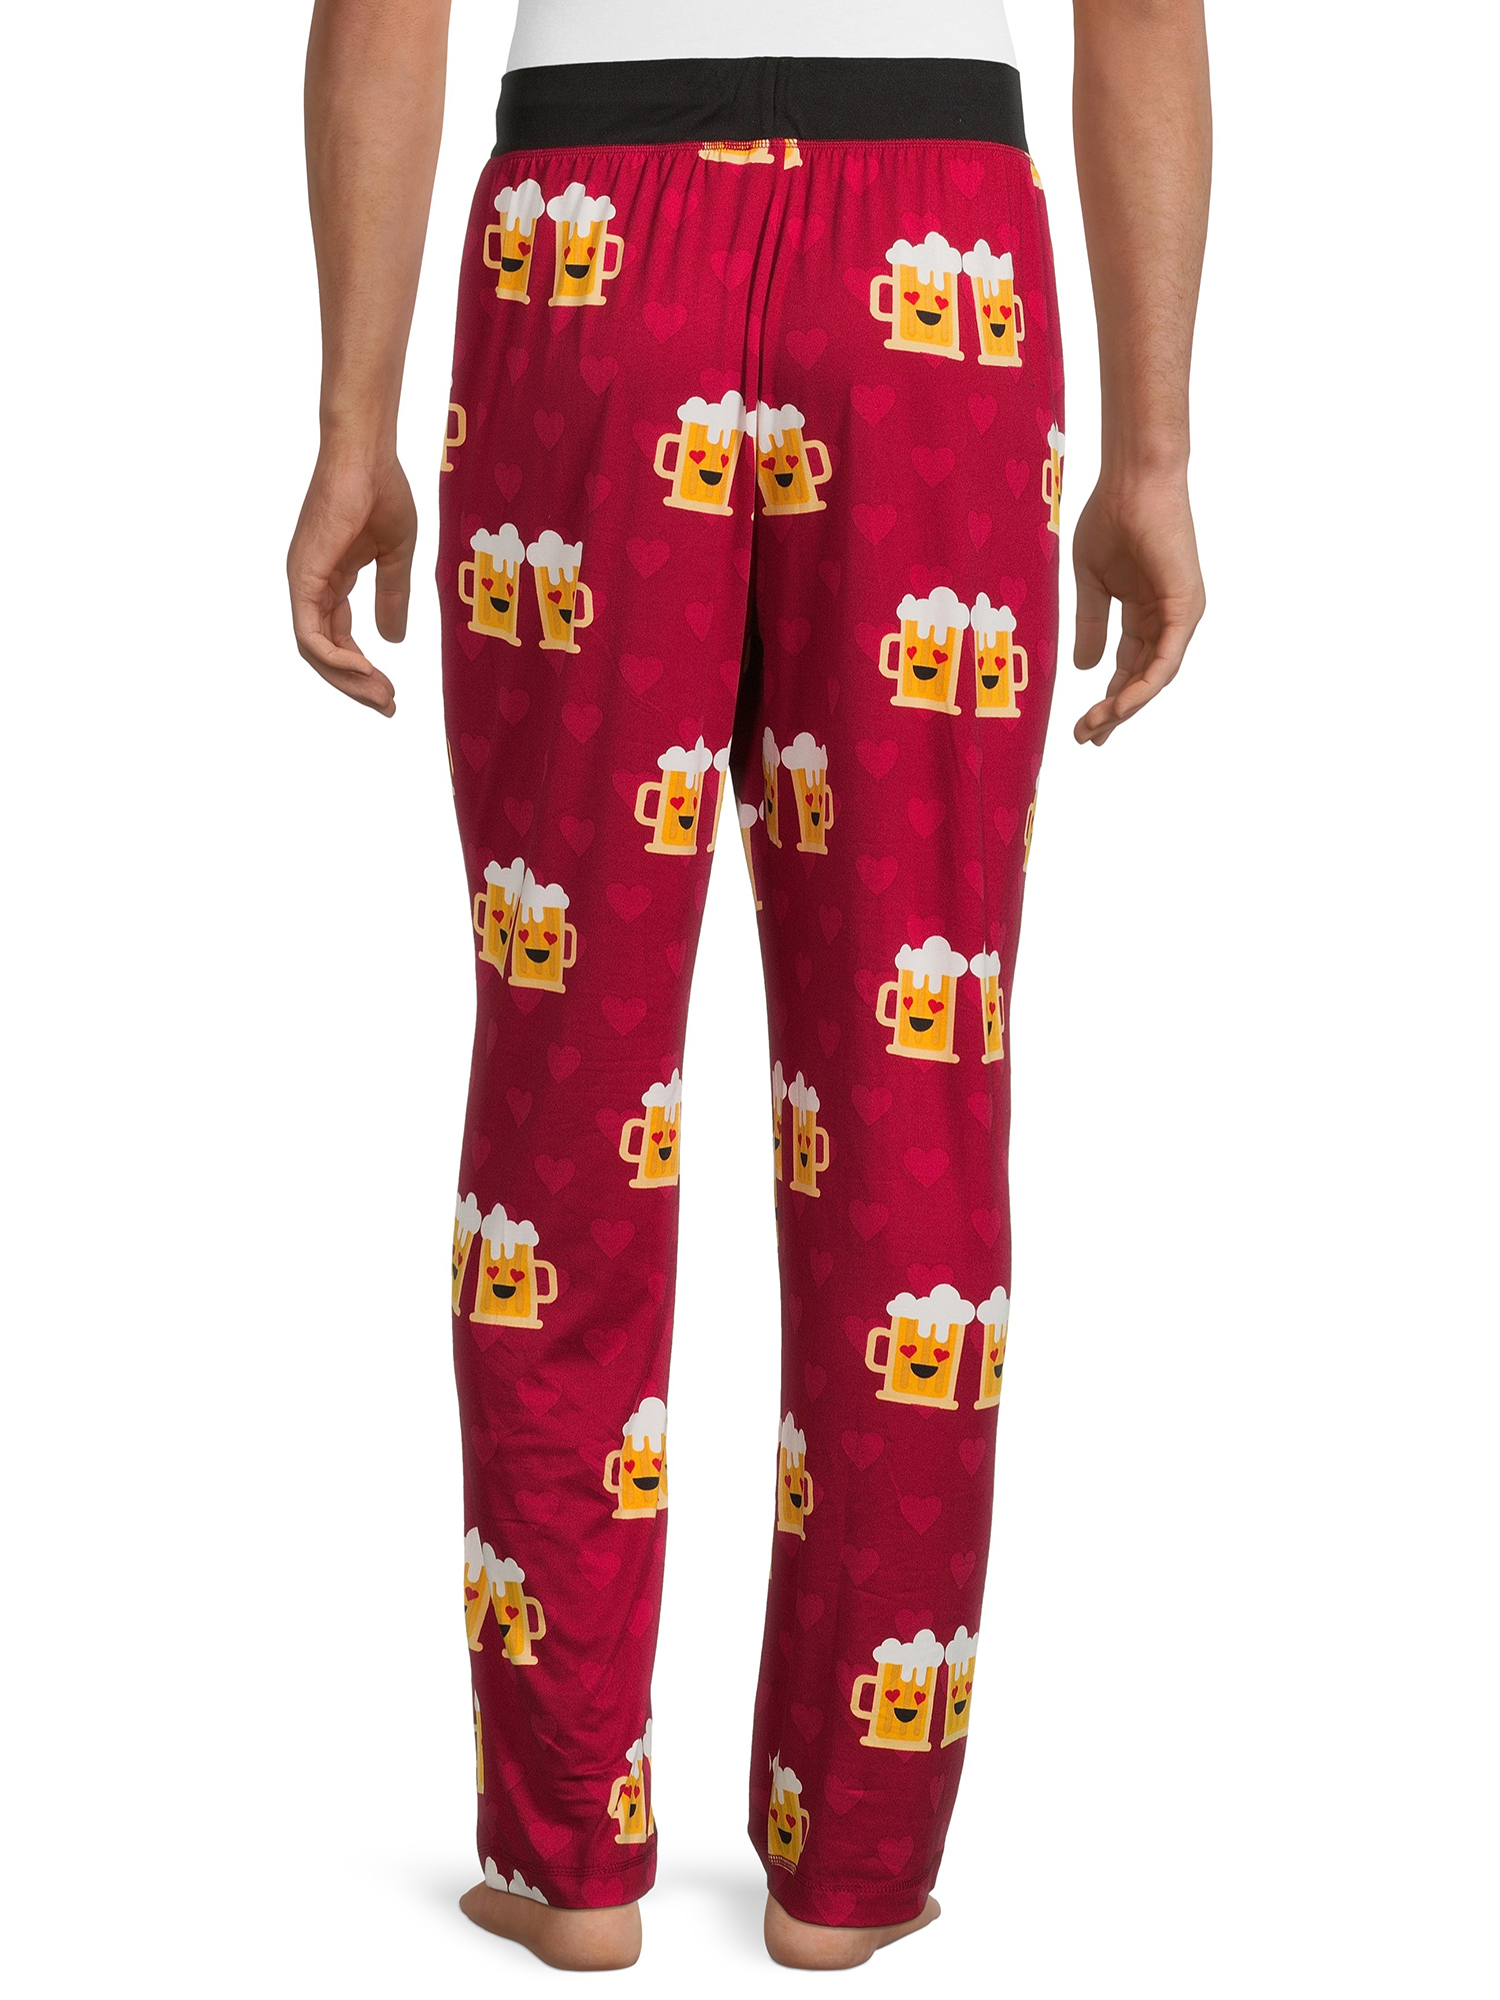 Valentine's Day Men's and Big Men's Sleep Pants, 2-Pack, Heather Red and Match Made Beer Designs - image 3 of 5